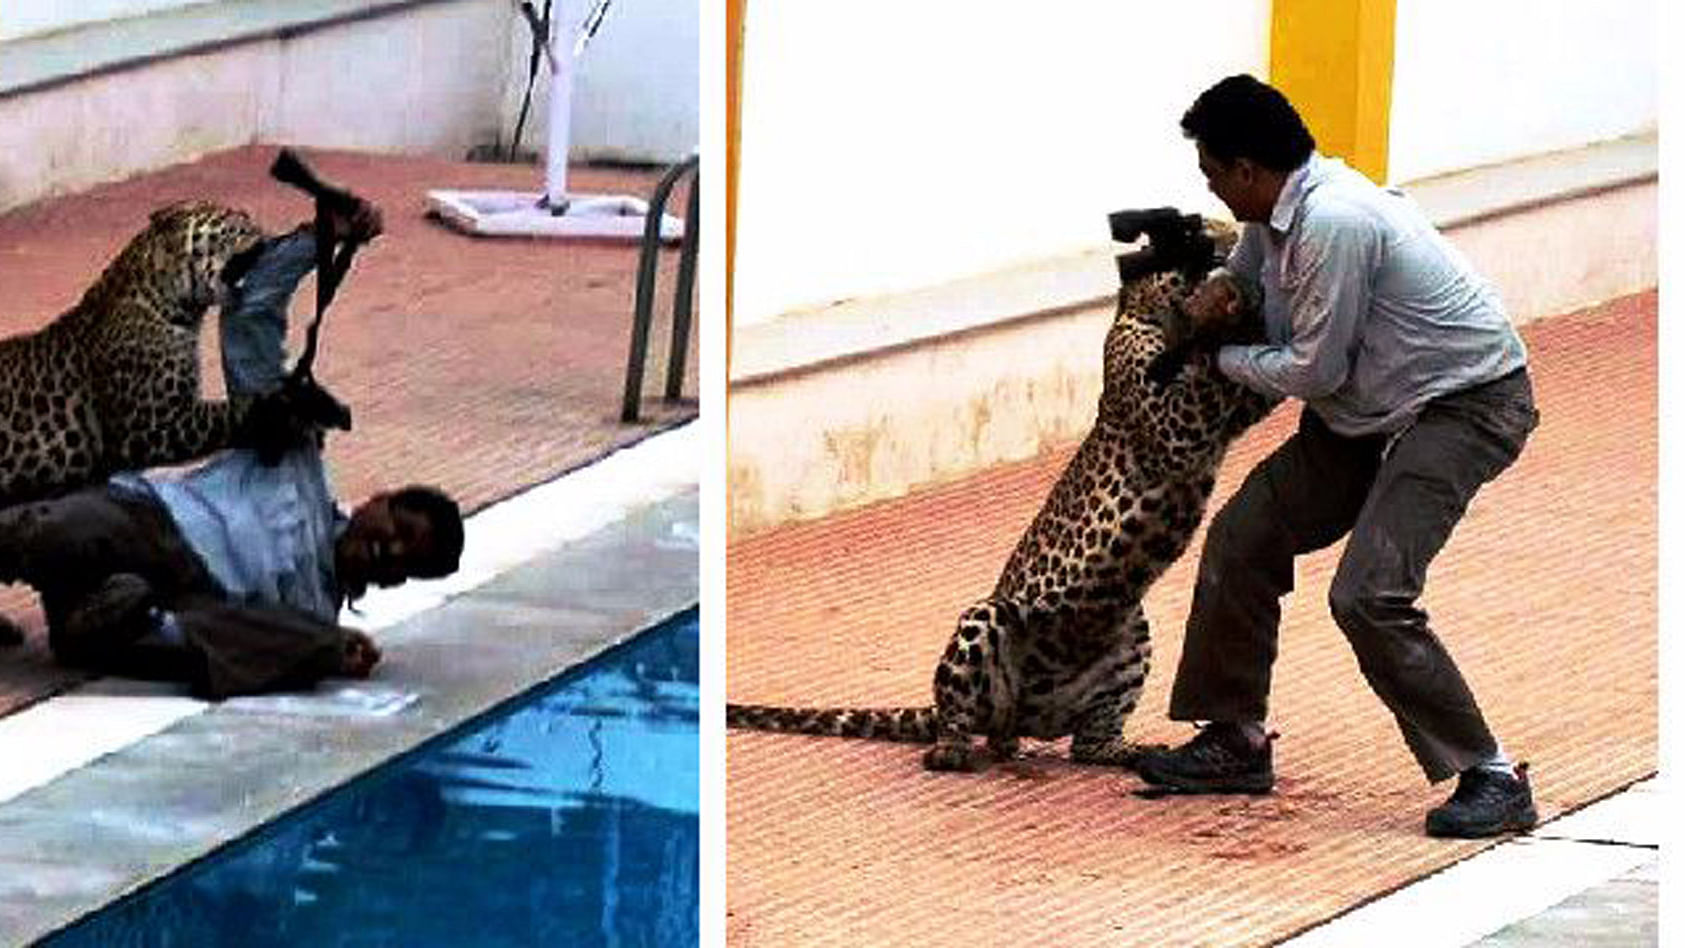 The video of the leopard attacking Sanjay Gubbi had gone viral. (Photo Courtesy: The News Minute)